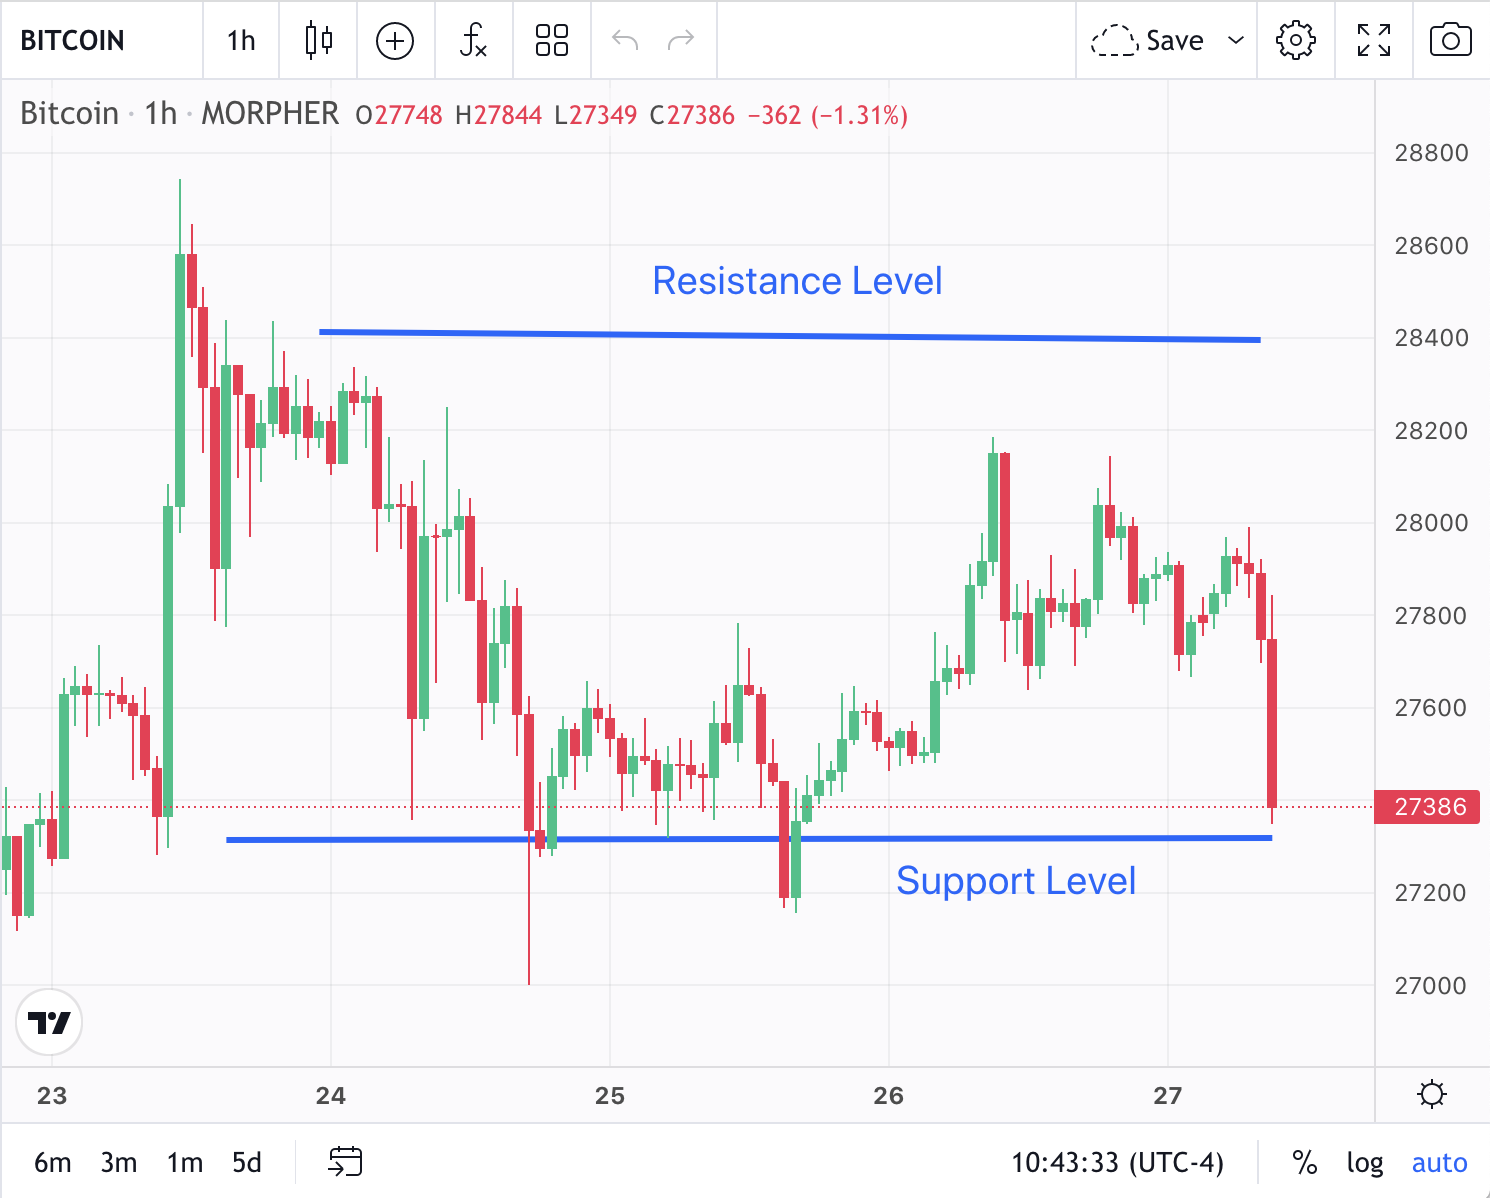 Bitcoin Resistance Level and Support Level